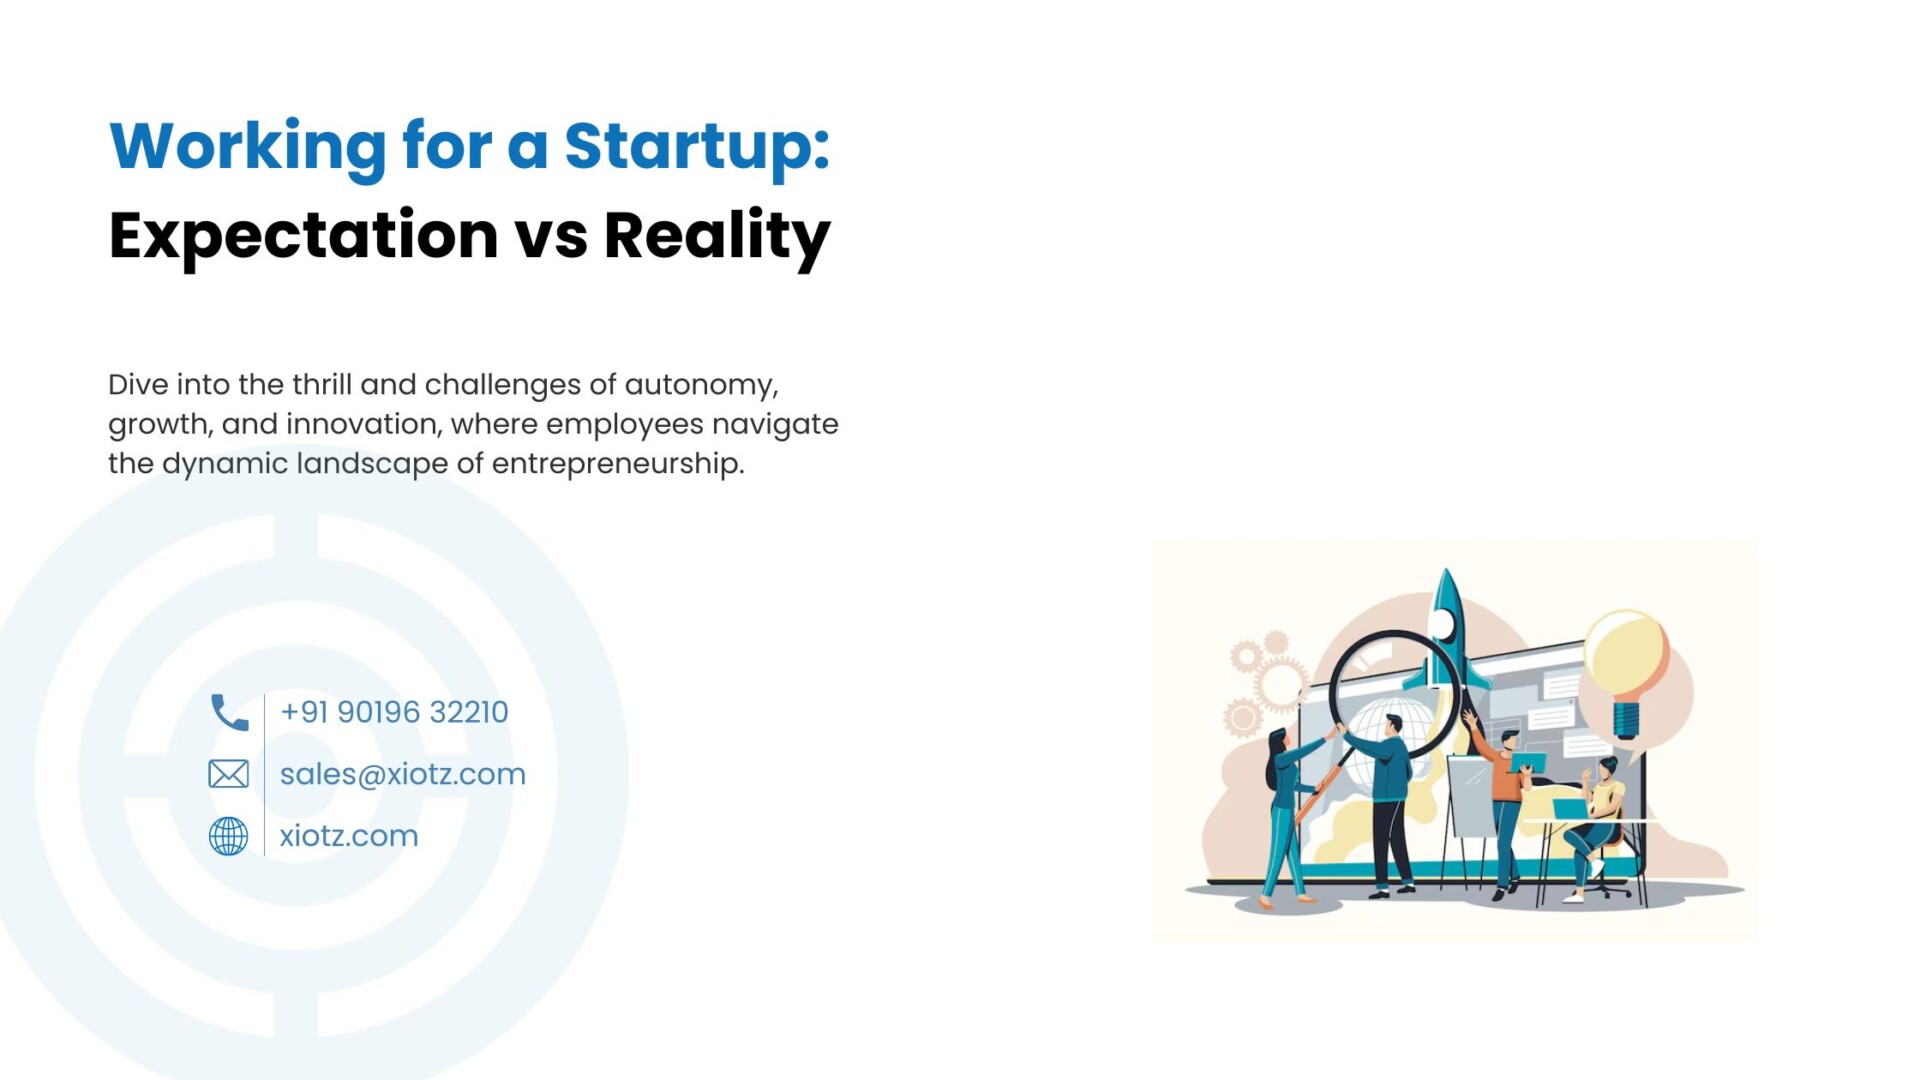 Working for a Startup: Expectation vs Reality